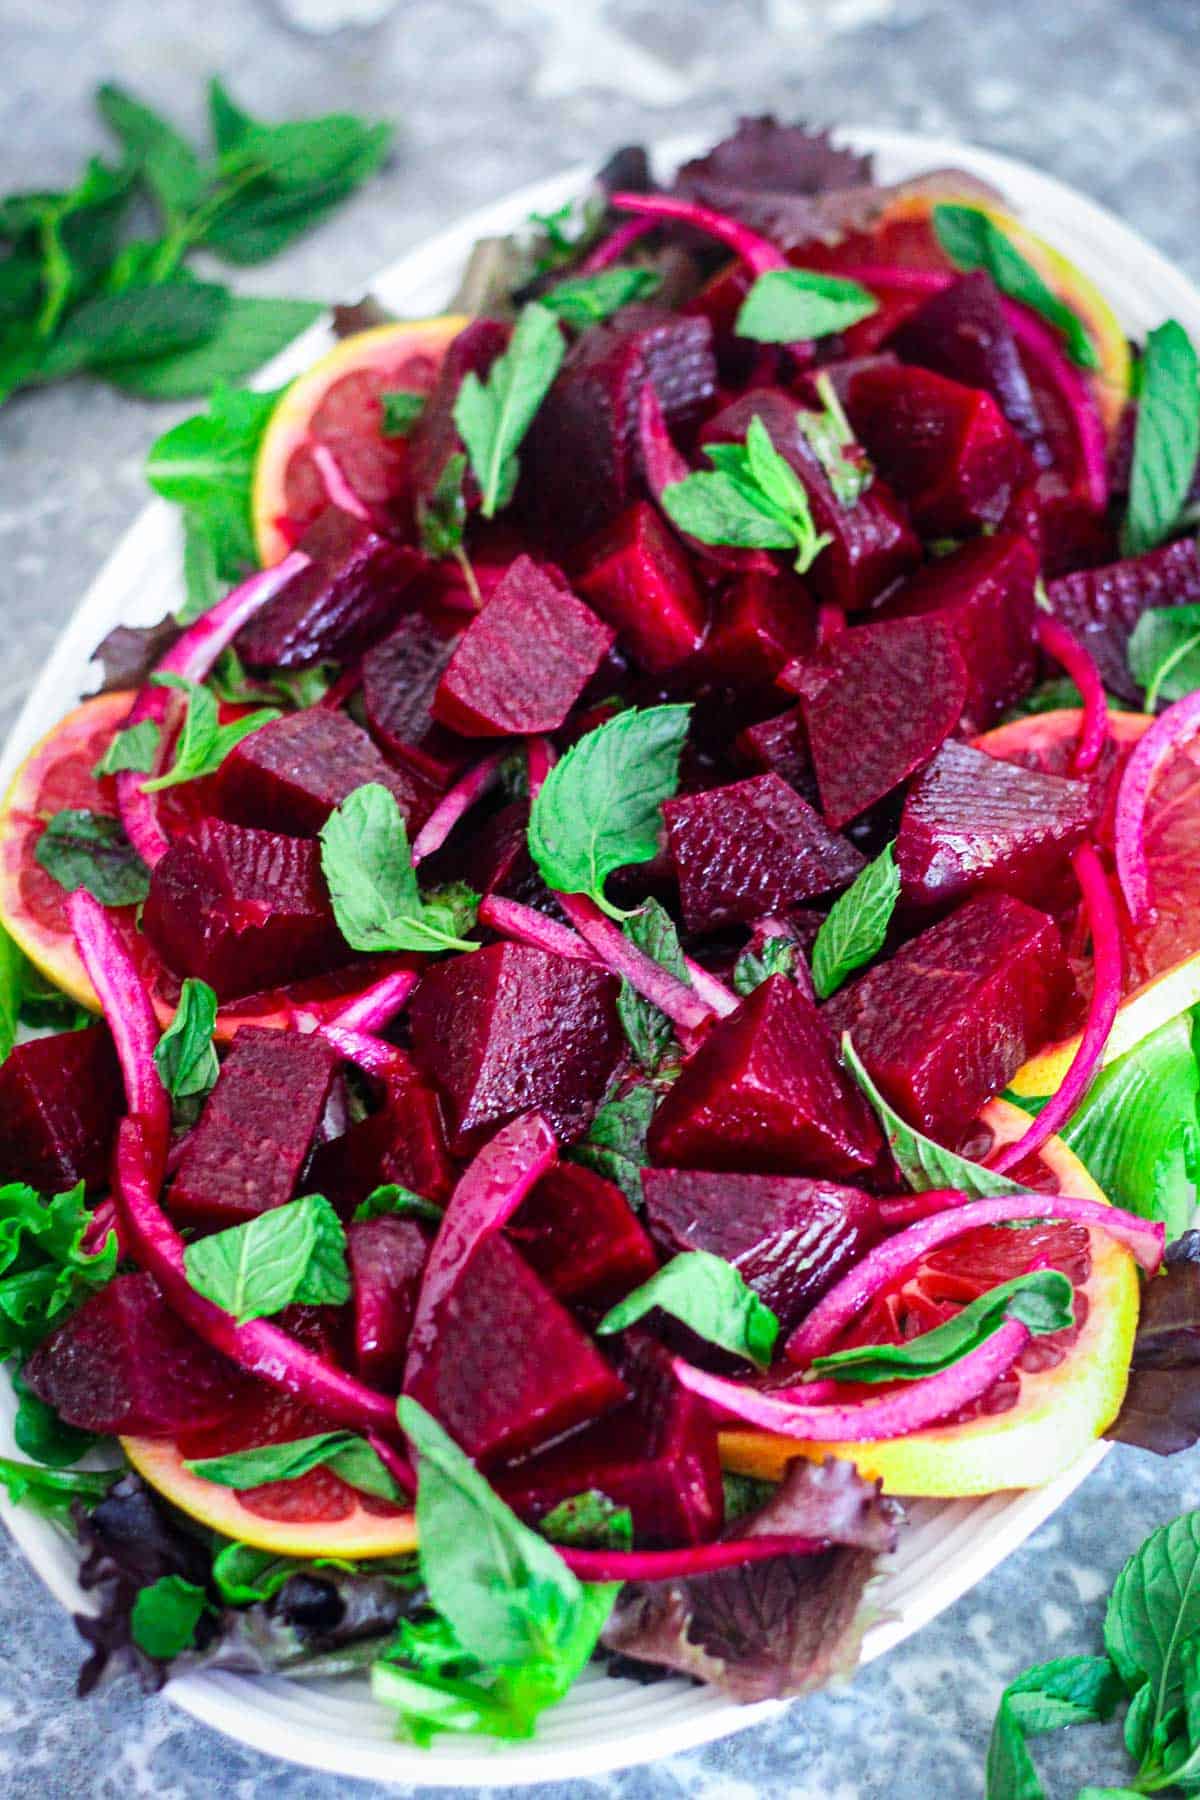 An oval platter with a beets and oranges salad over a bed of greens. You can see mint and onions peeking through other ingredients in the salad.